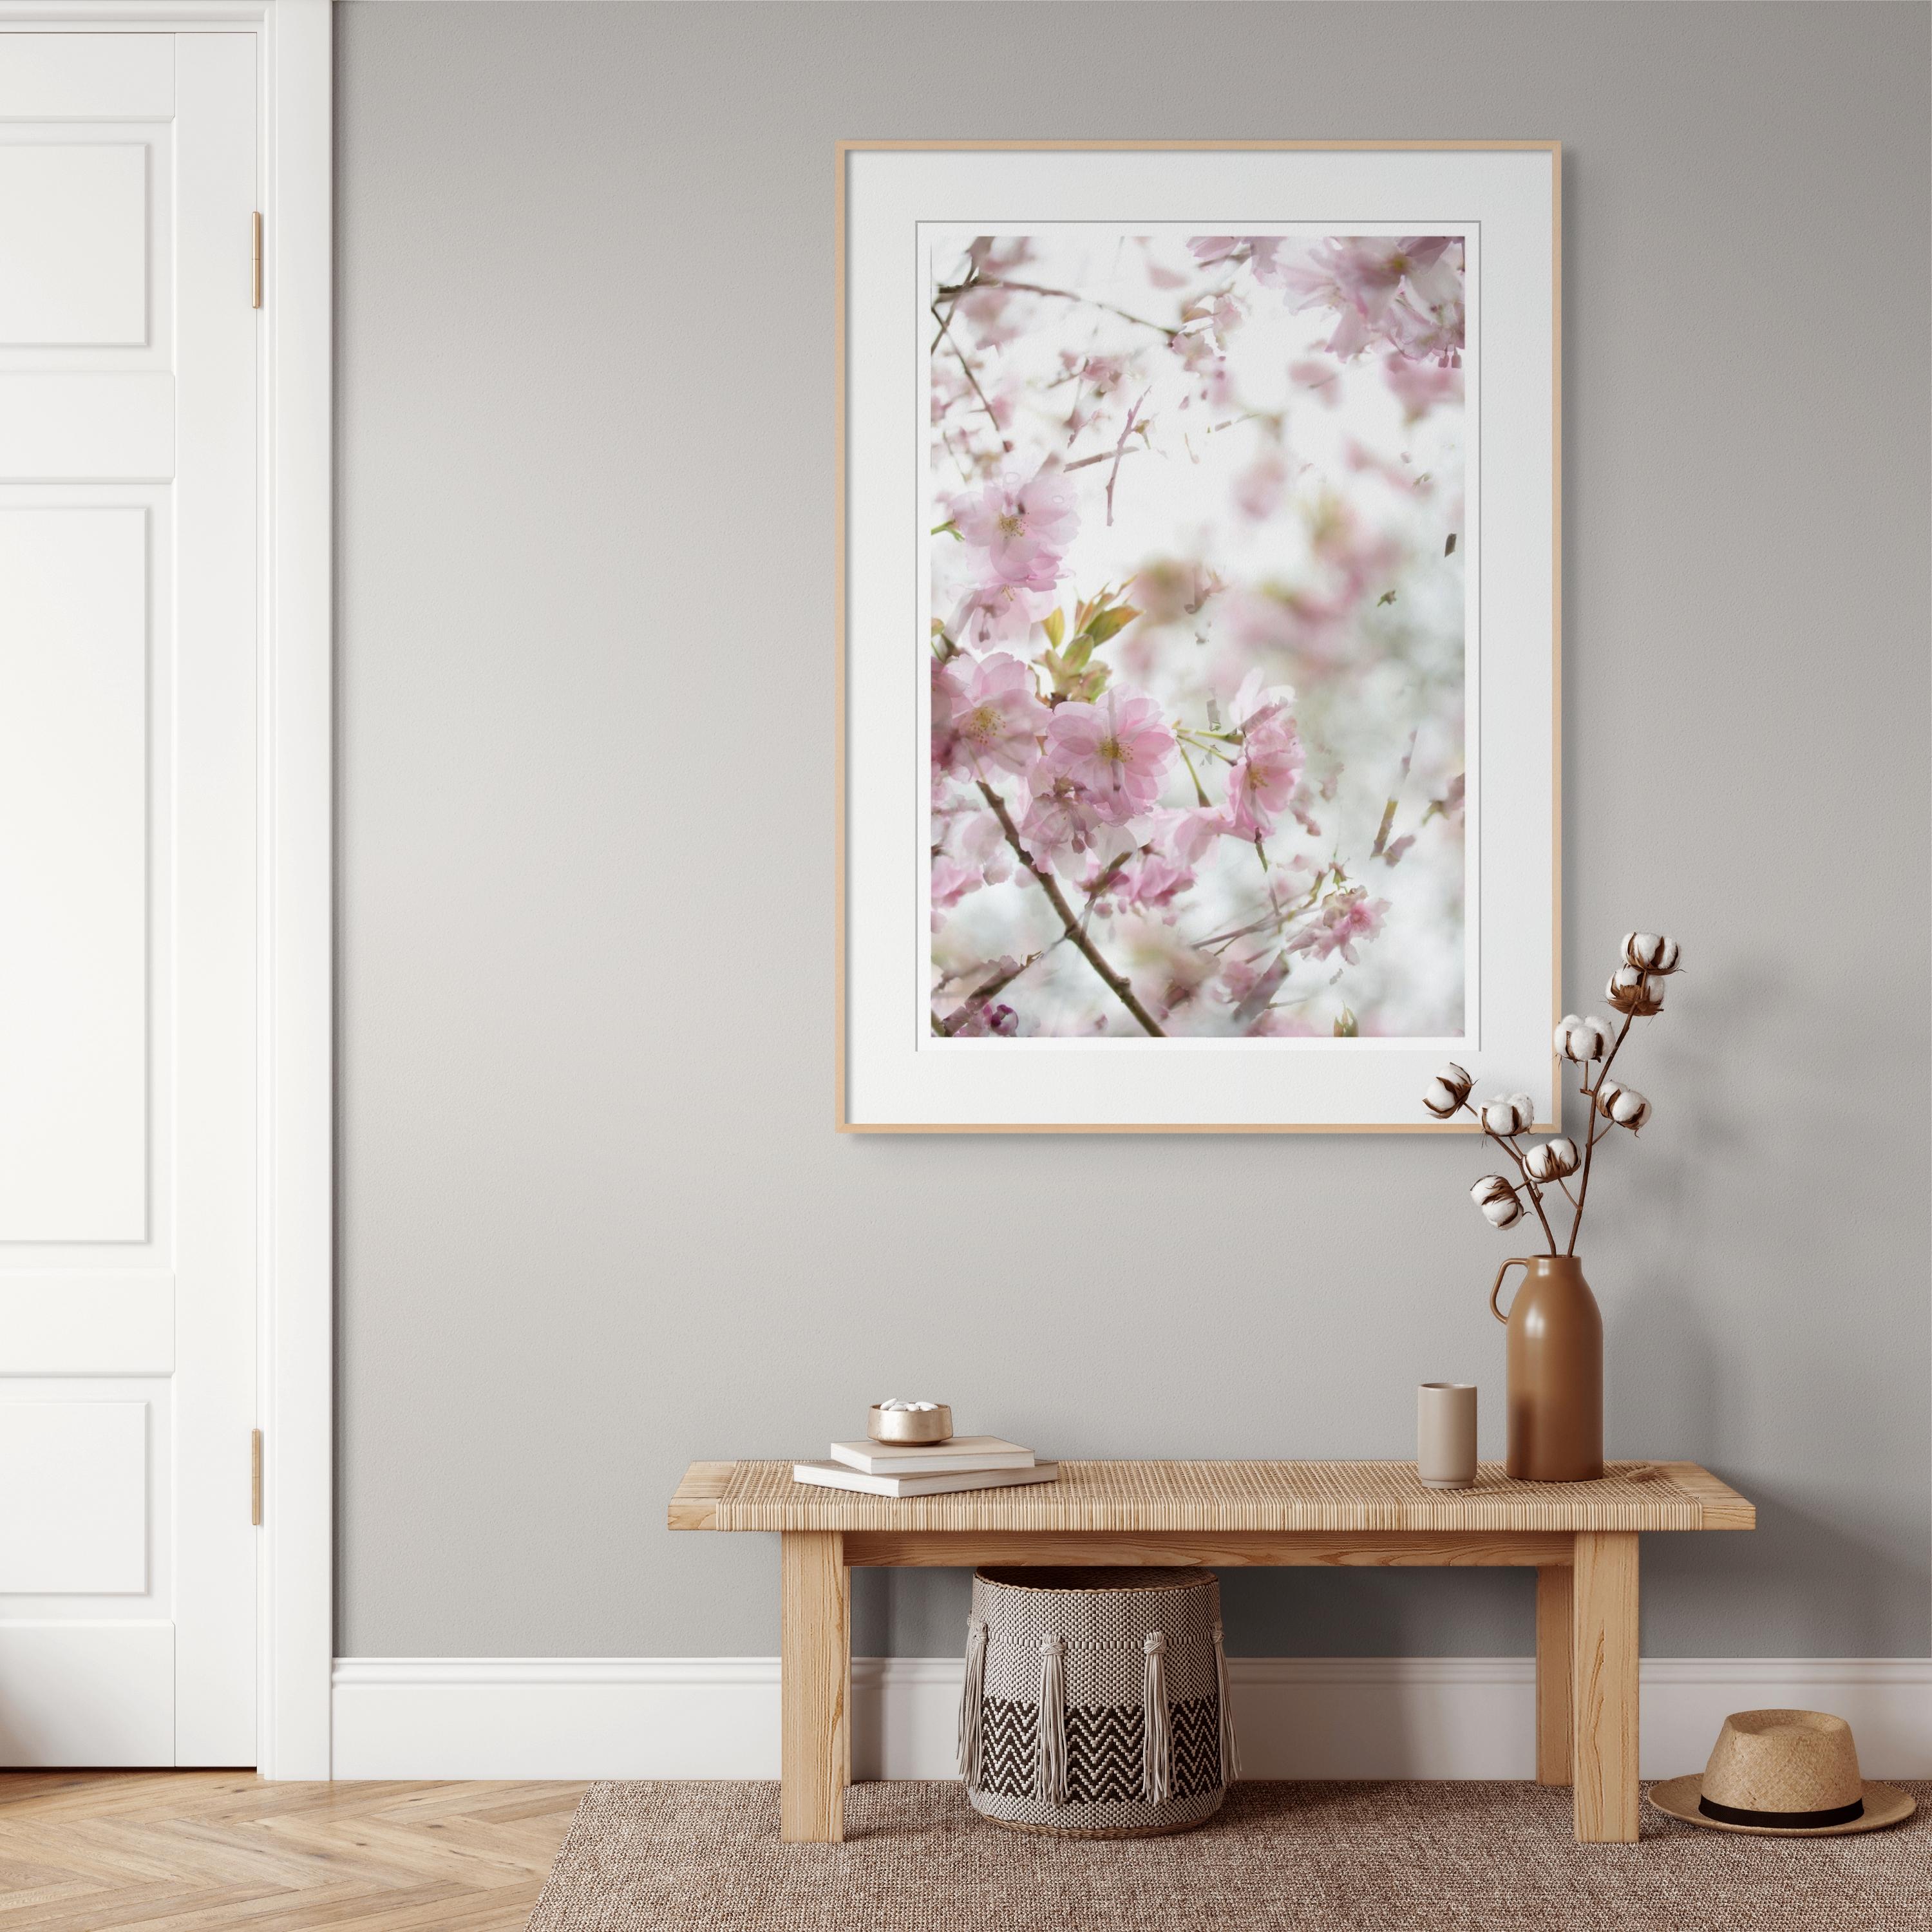 'The Optimism of Spring' Photograph Cherry blossom Sakura flowers green pink - Gray Landscape Photograph by Sophia Milligan